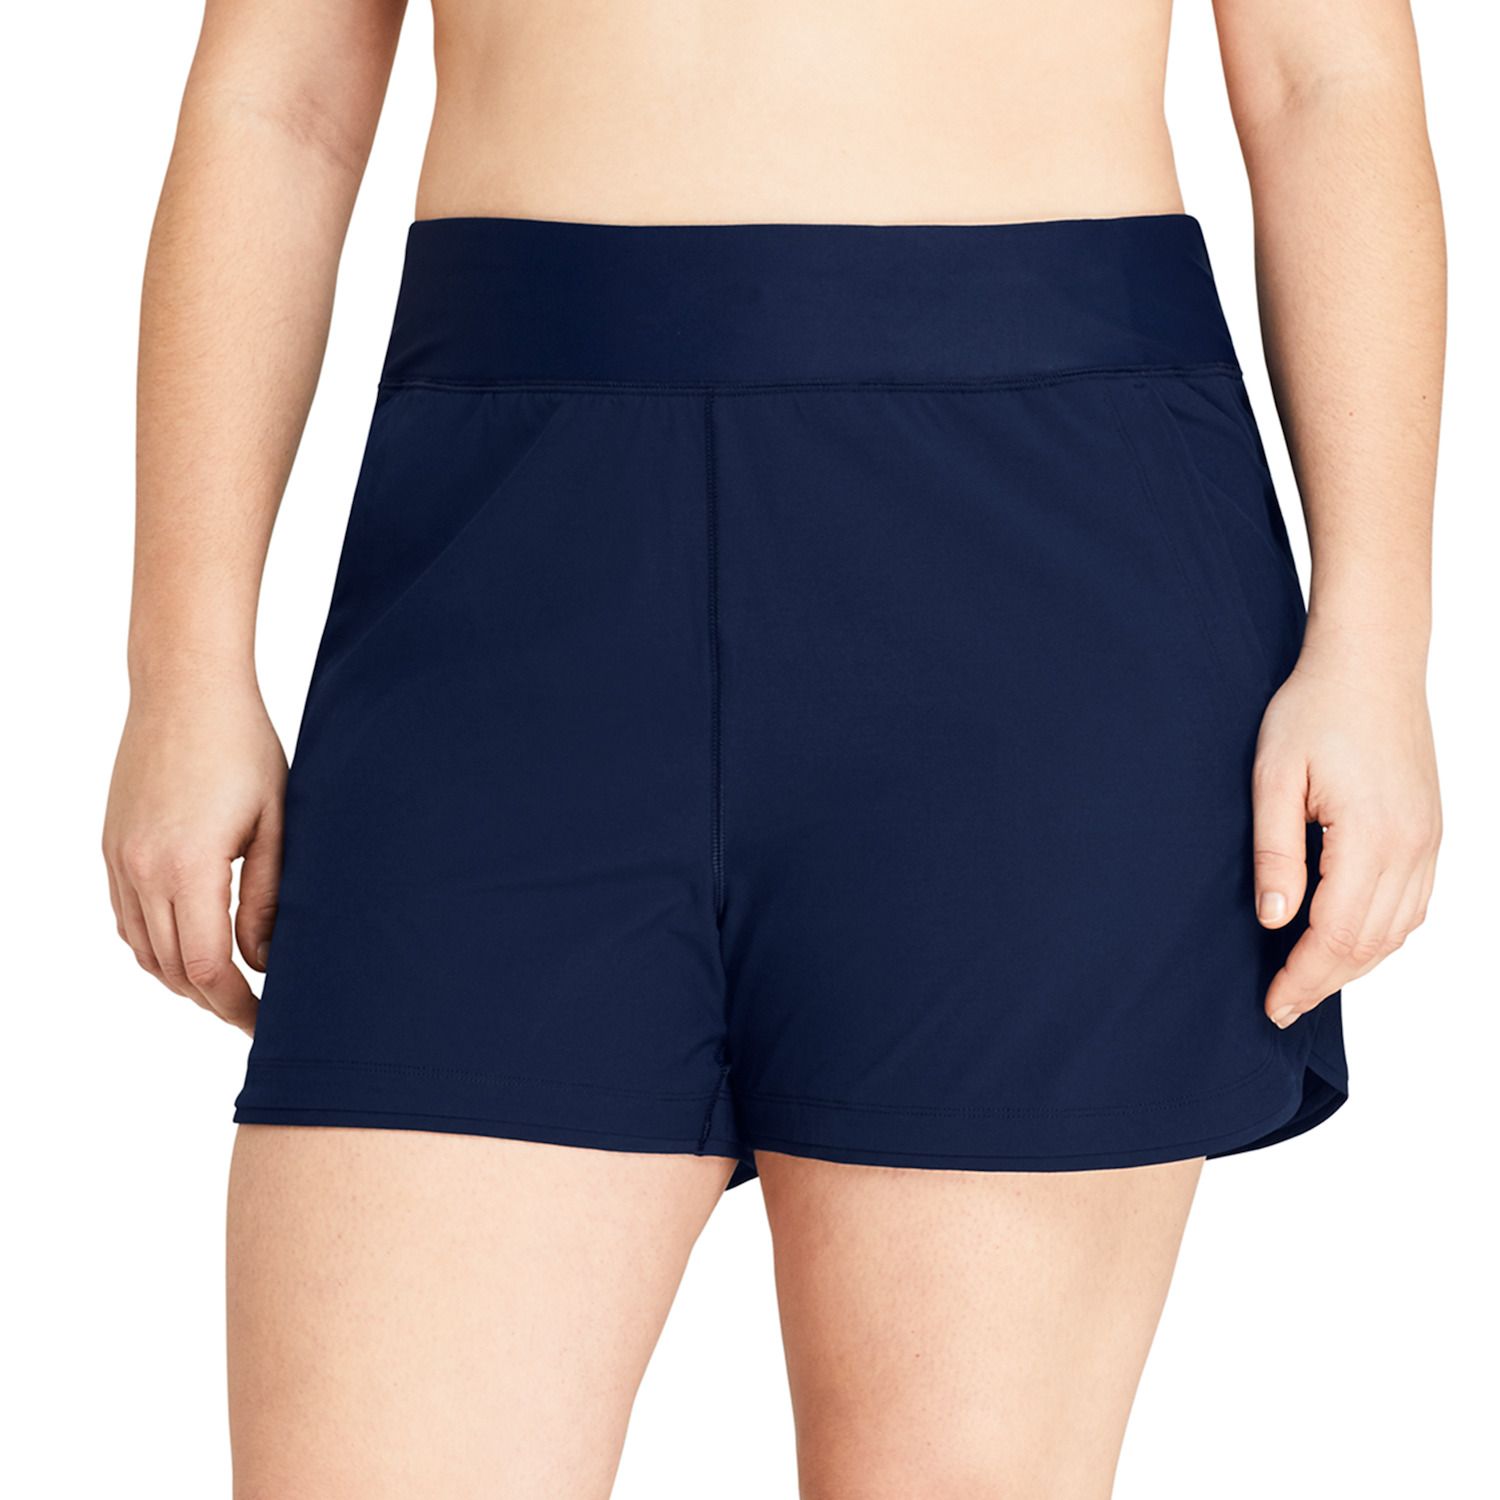 Image for Lands' End Plus Size Quick Dry Thigh-Minimizer Swim Shorts at Kohl's.